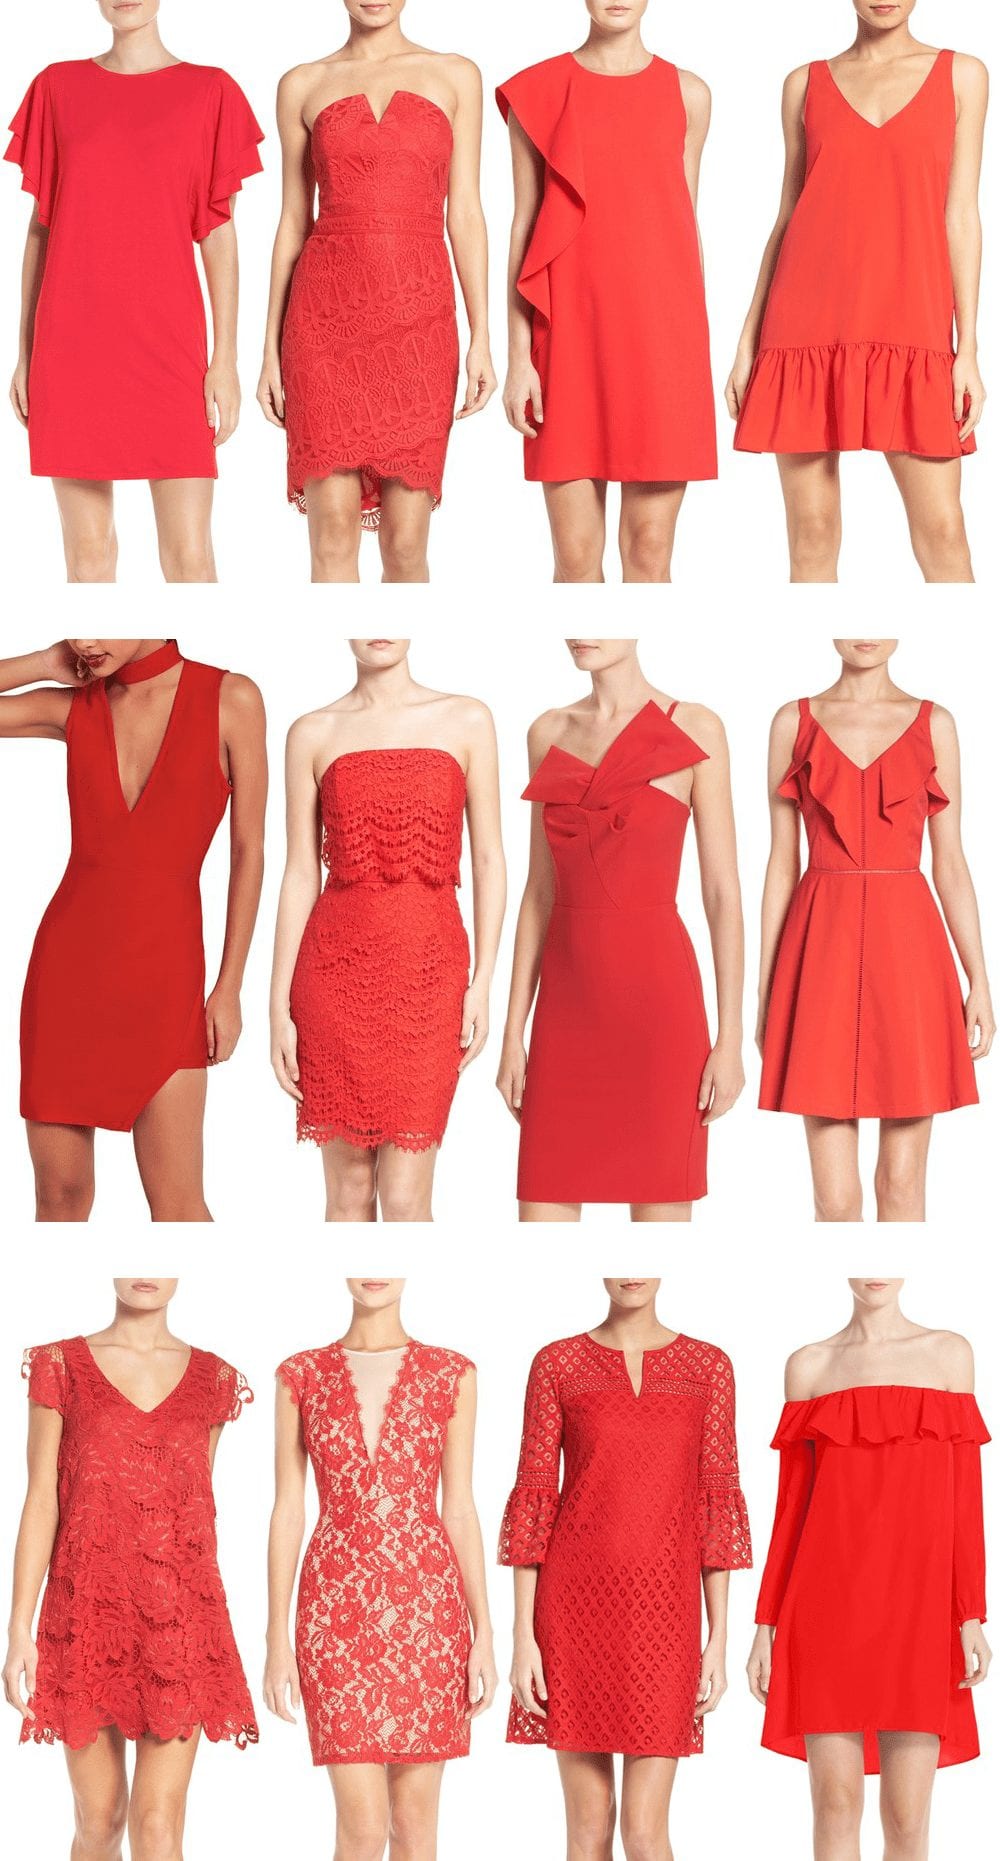 Red Dress, Little Red Dress, The Bachelor Recap, Valentine's Day, Valentine's Day Dress